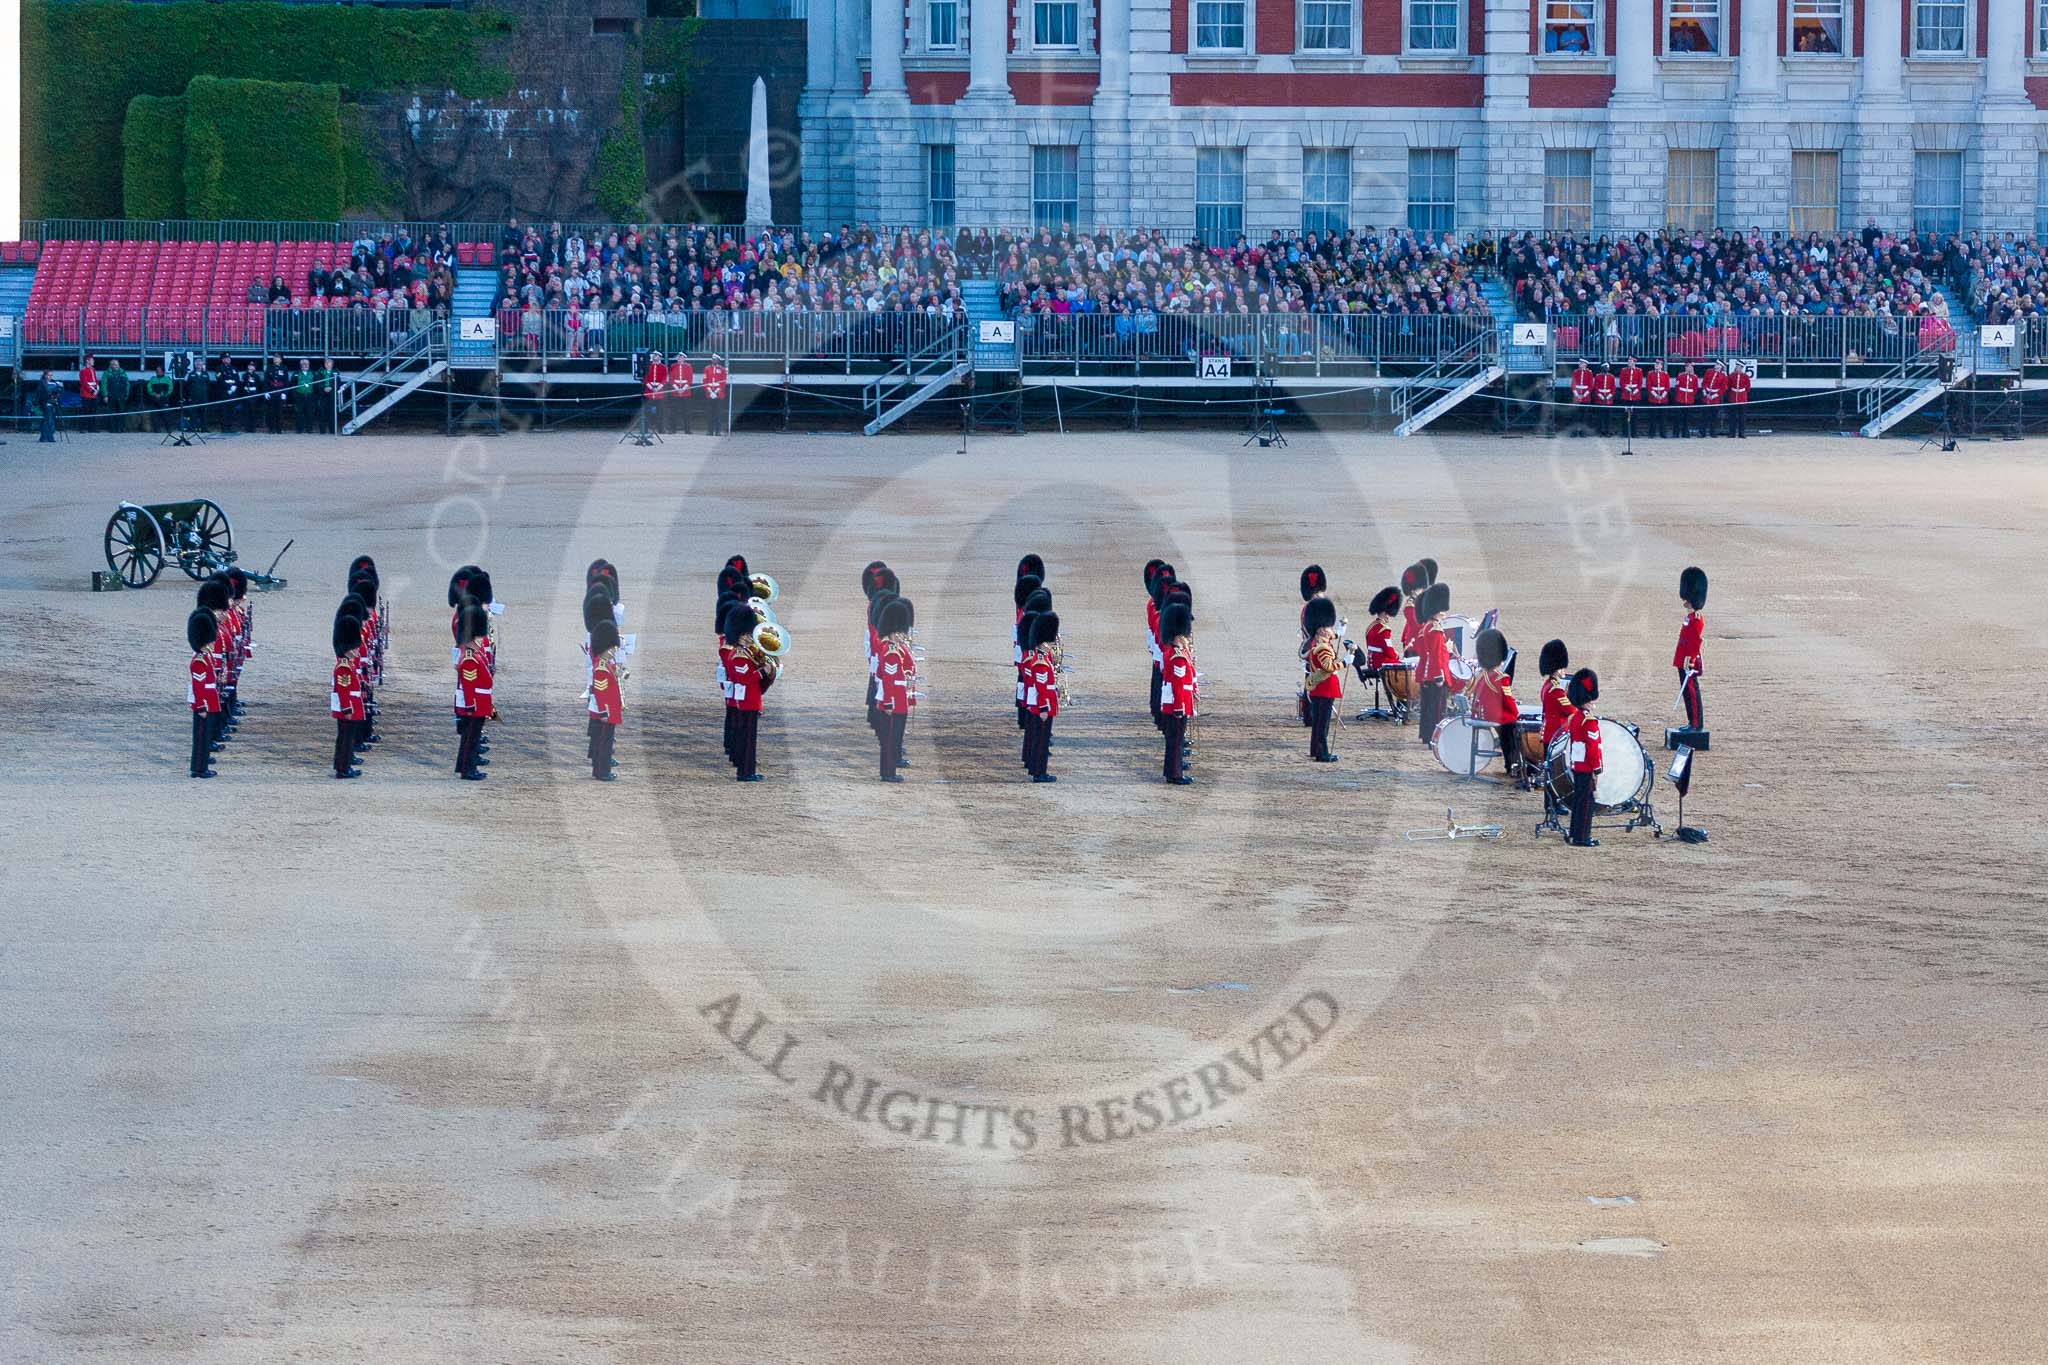 Beating Retreat 2015 - Waterloo 200.
Horse Guards Parade, Westminster,
London,

United Kingdom,
on 10 June 2015 at 21:21, image #311